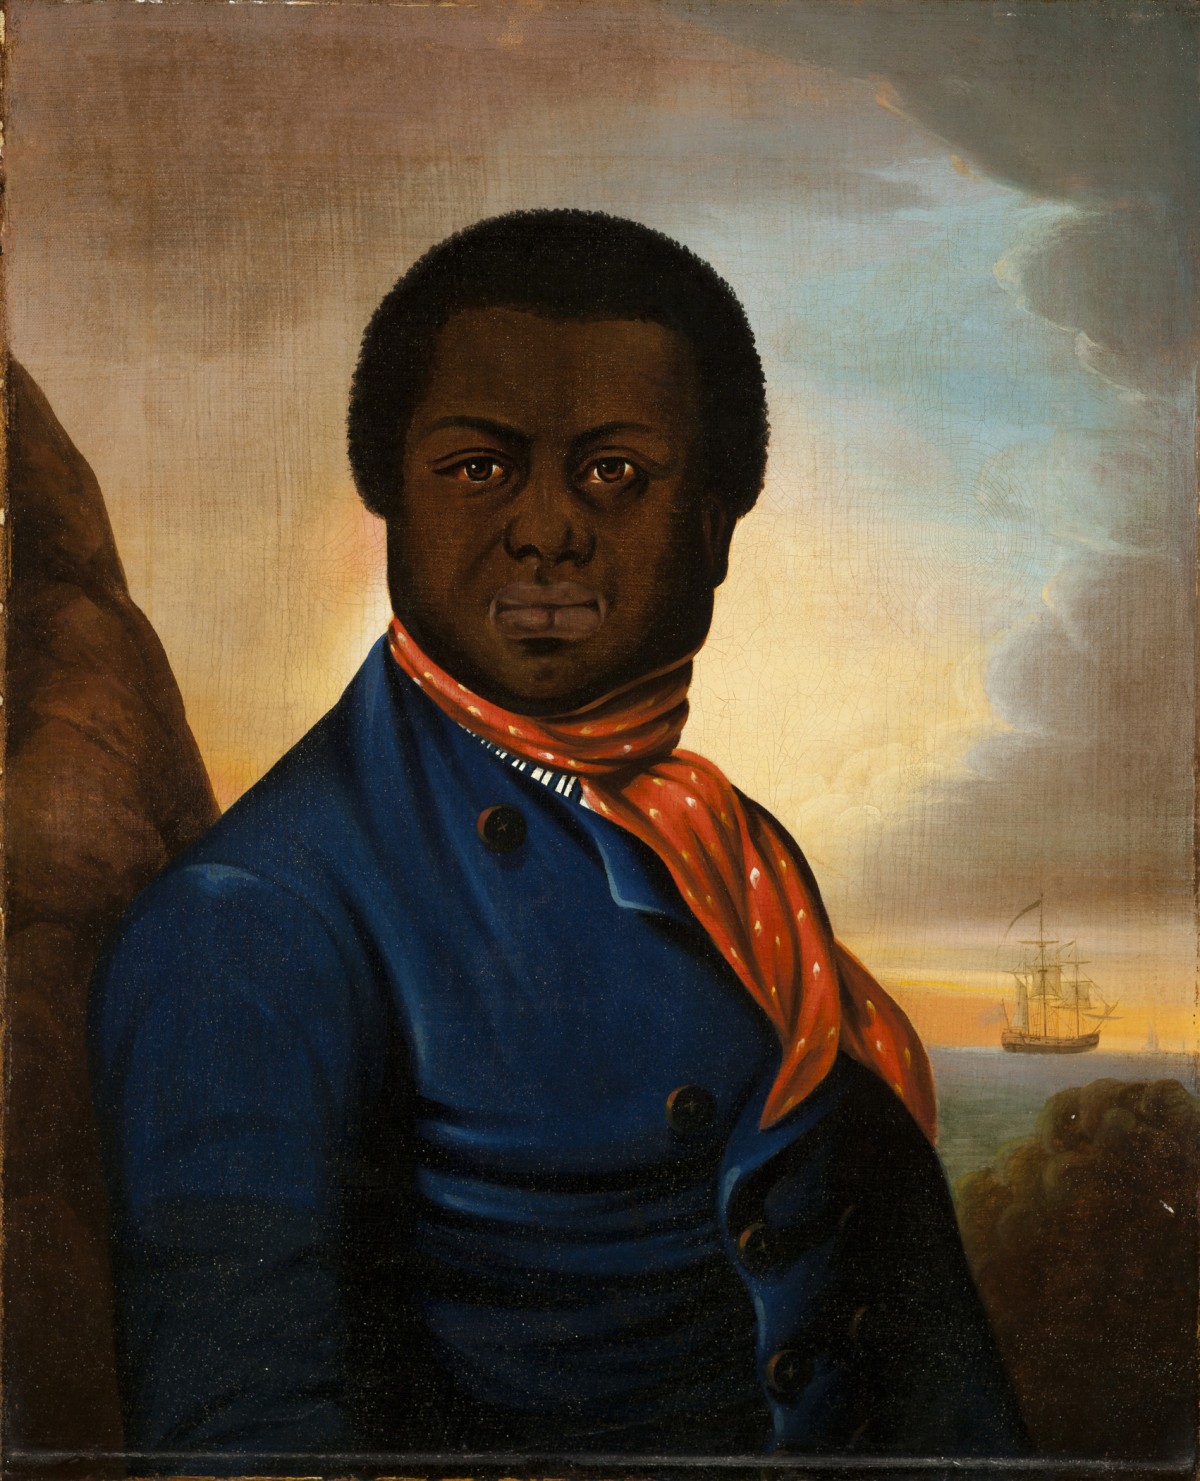 Portrait of a Sailor (Paul Cuffe?), United States, circa 1800, Los Angeles County Museum of Art, Purchased with funds provided by Cecile Bartman, photo © Museum Associates/LACMA